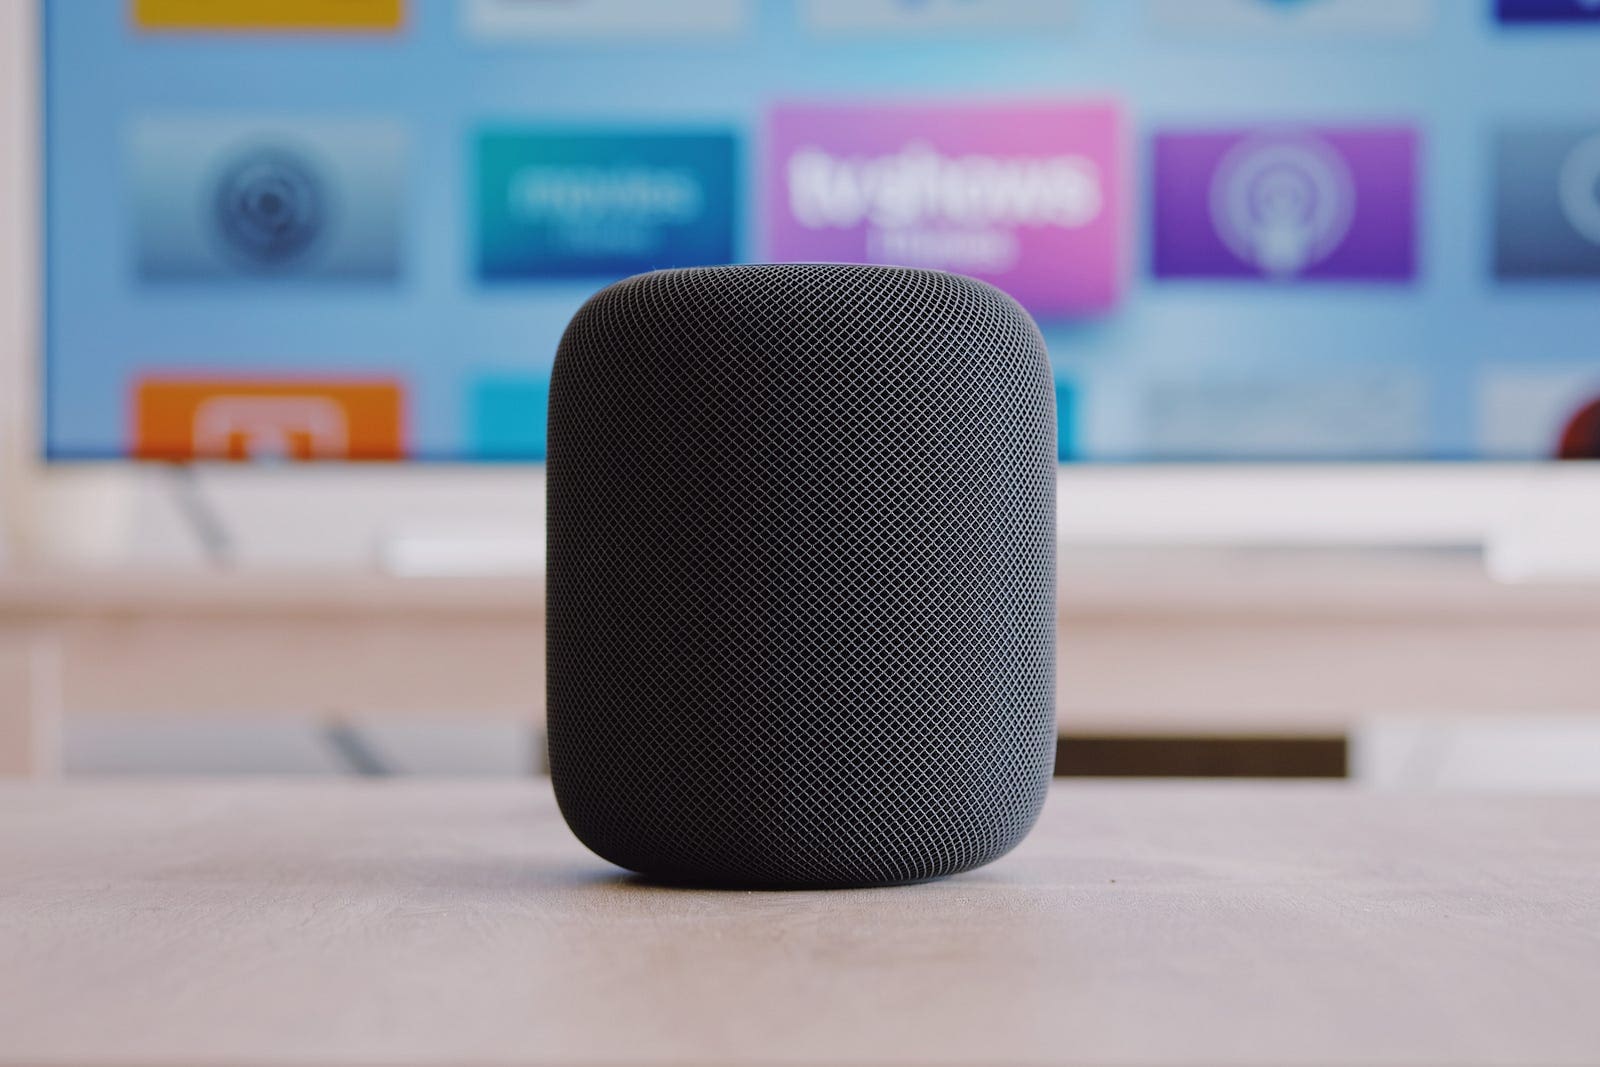 Apple Think About a HomePod Hub